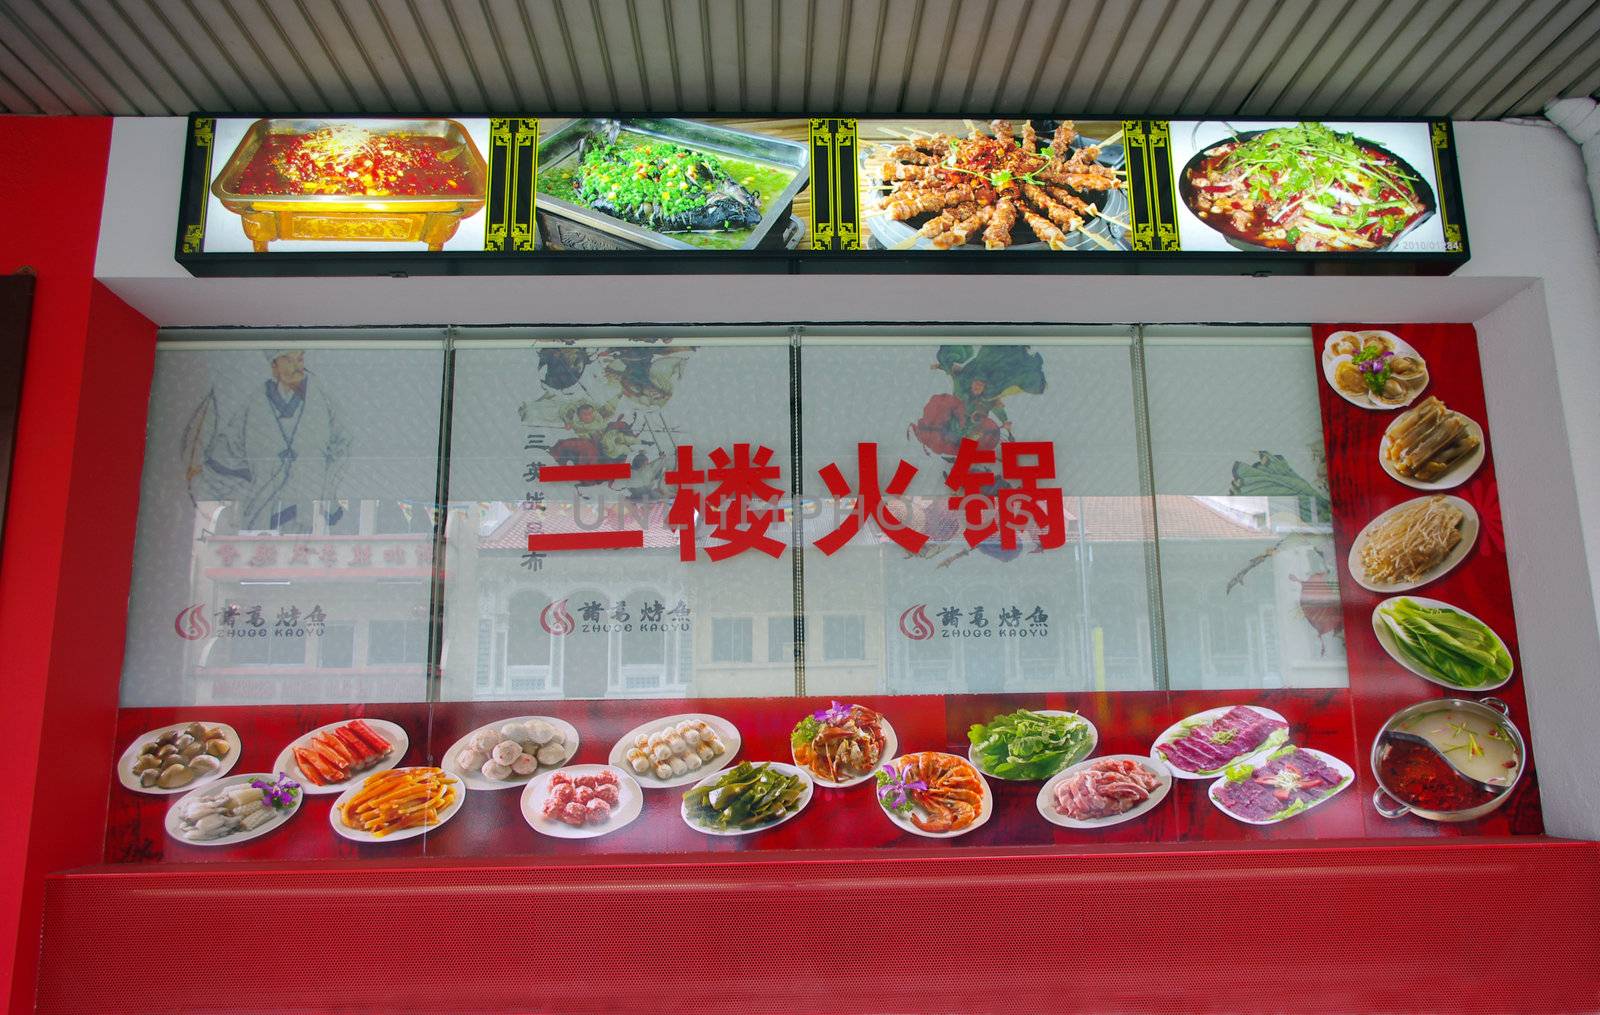 Chinese restaurant front displaying food dishes in Singapore.